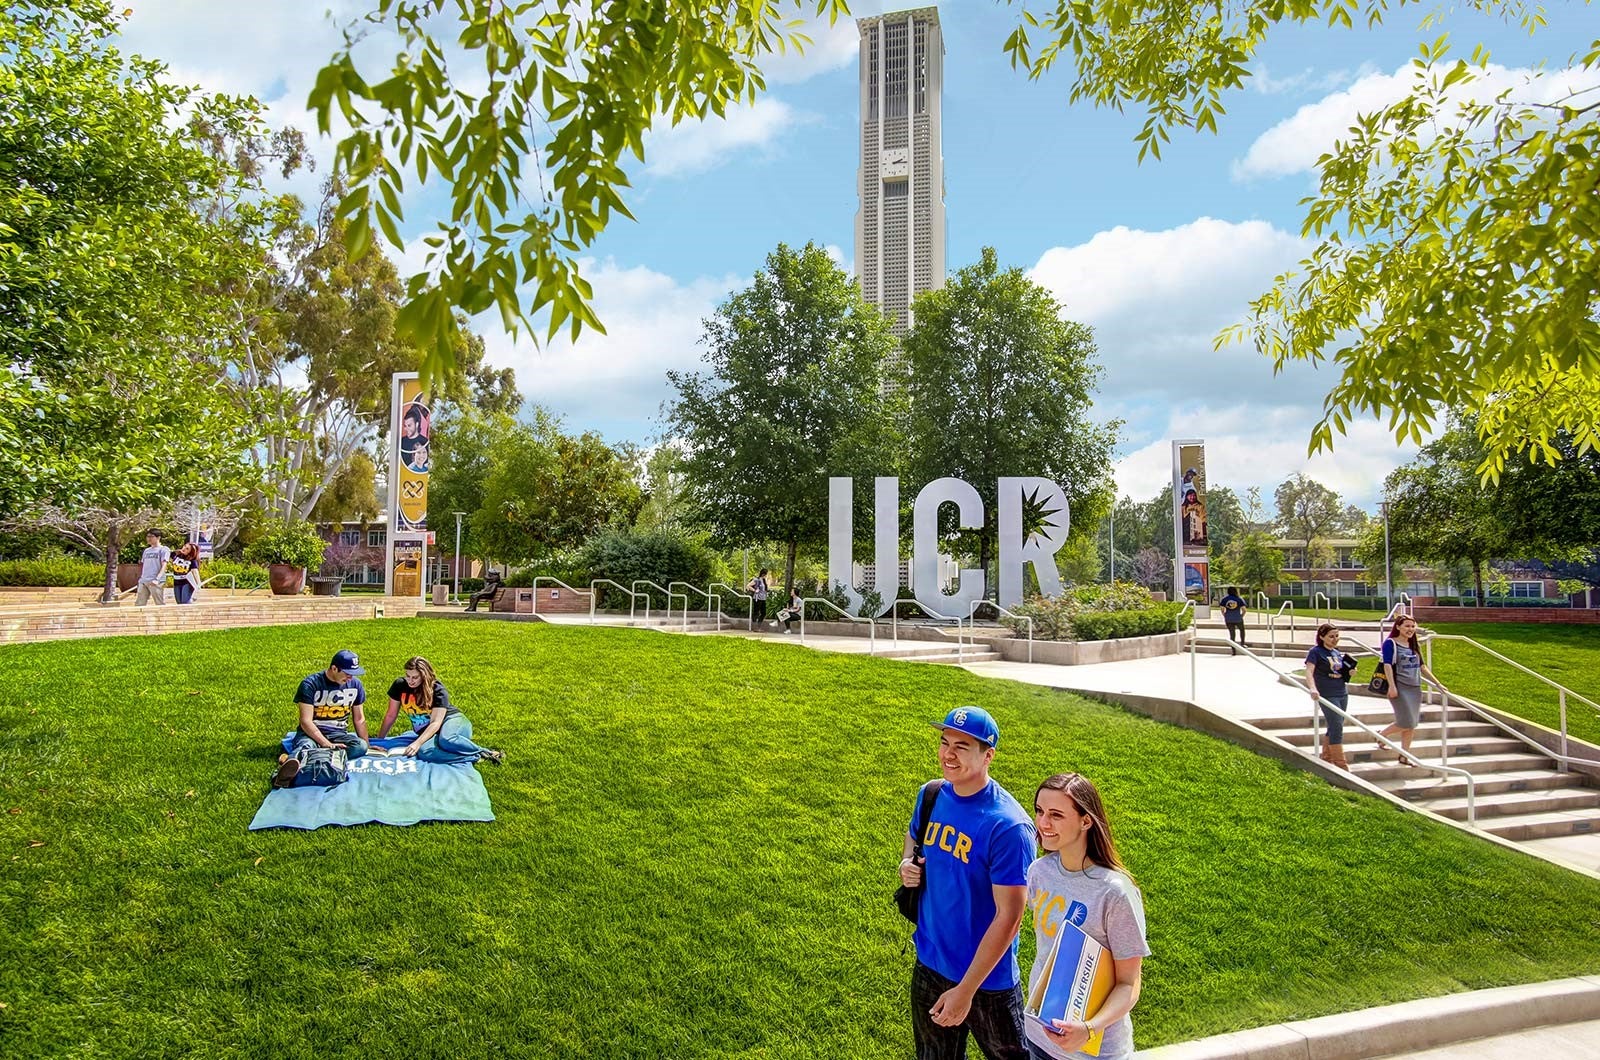 ucr in